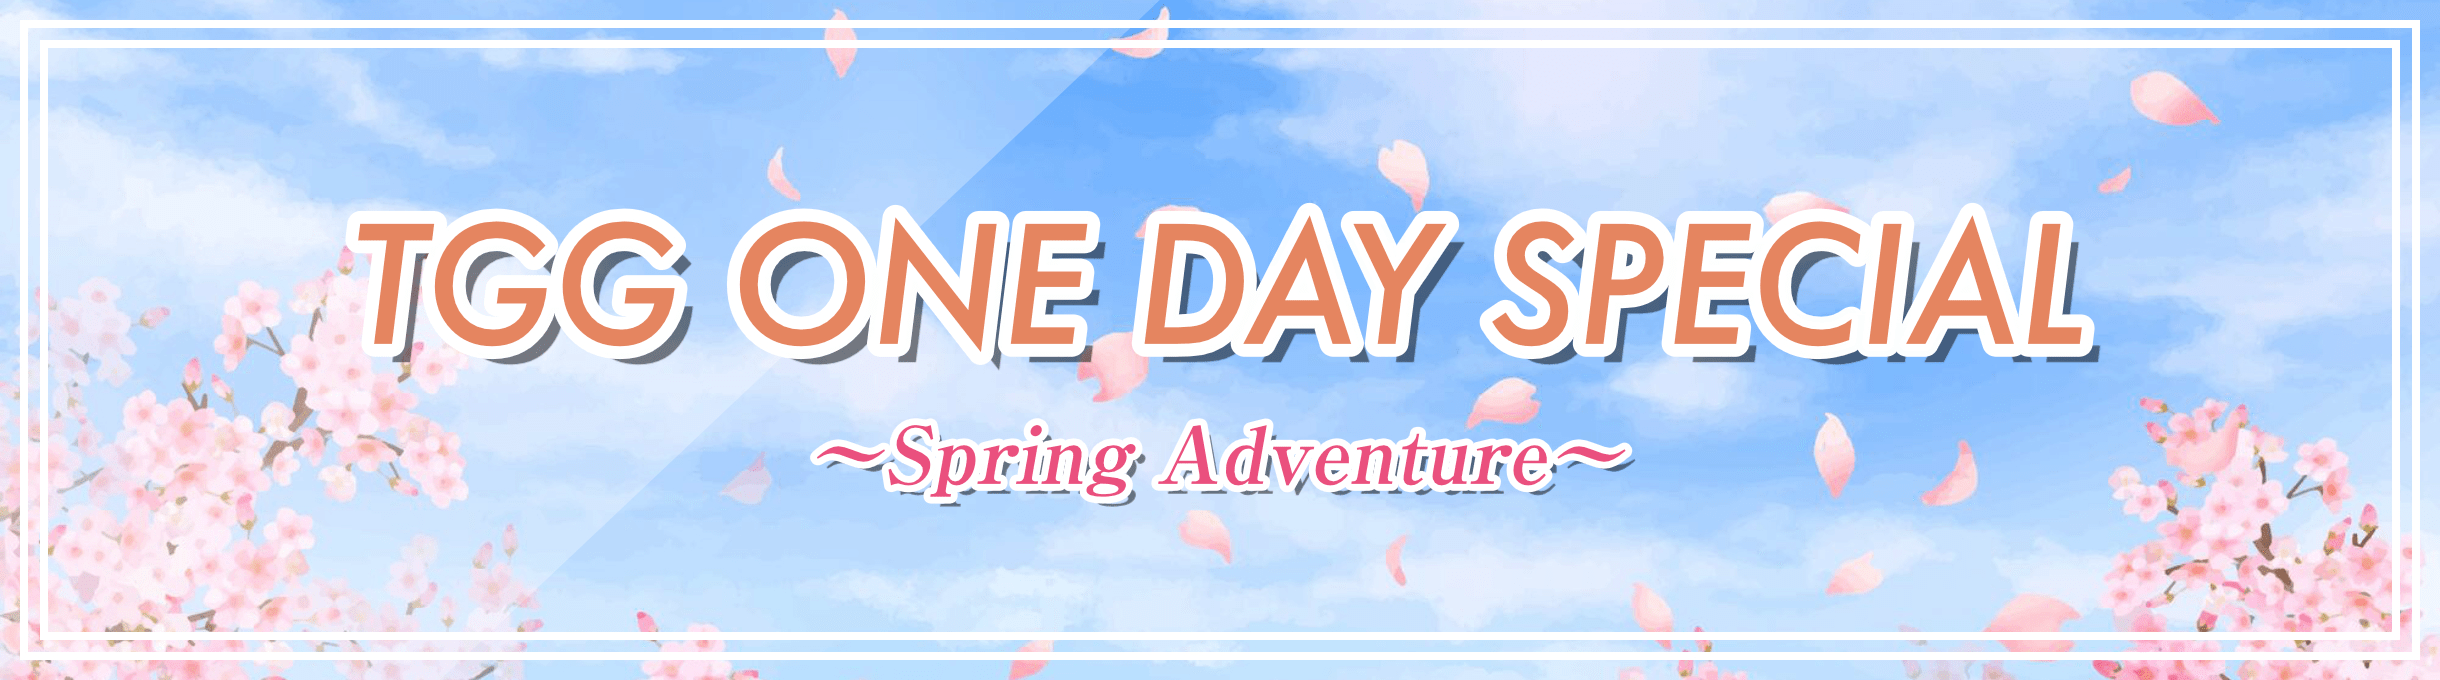 TGG ONE DAY SPECIAL ～Spring Adventure～